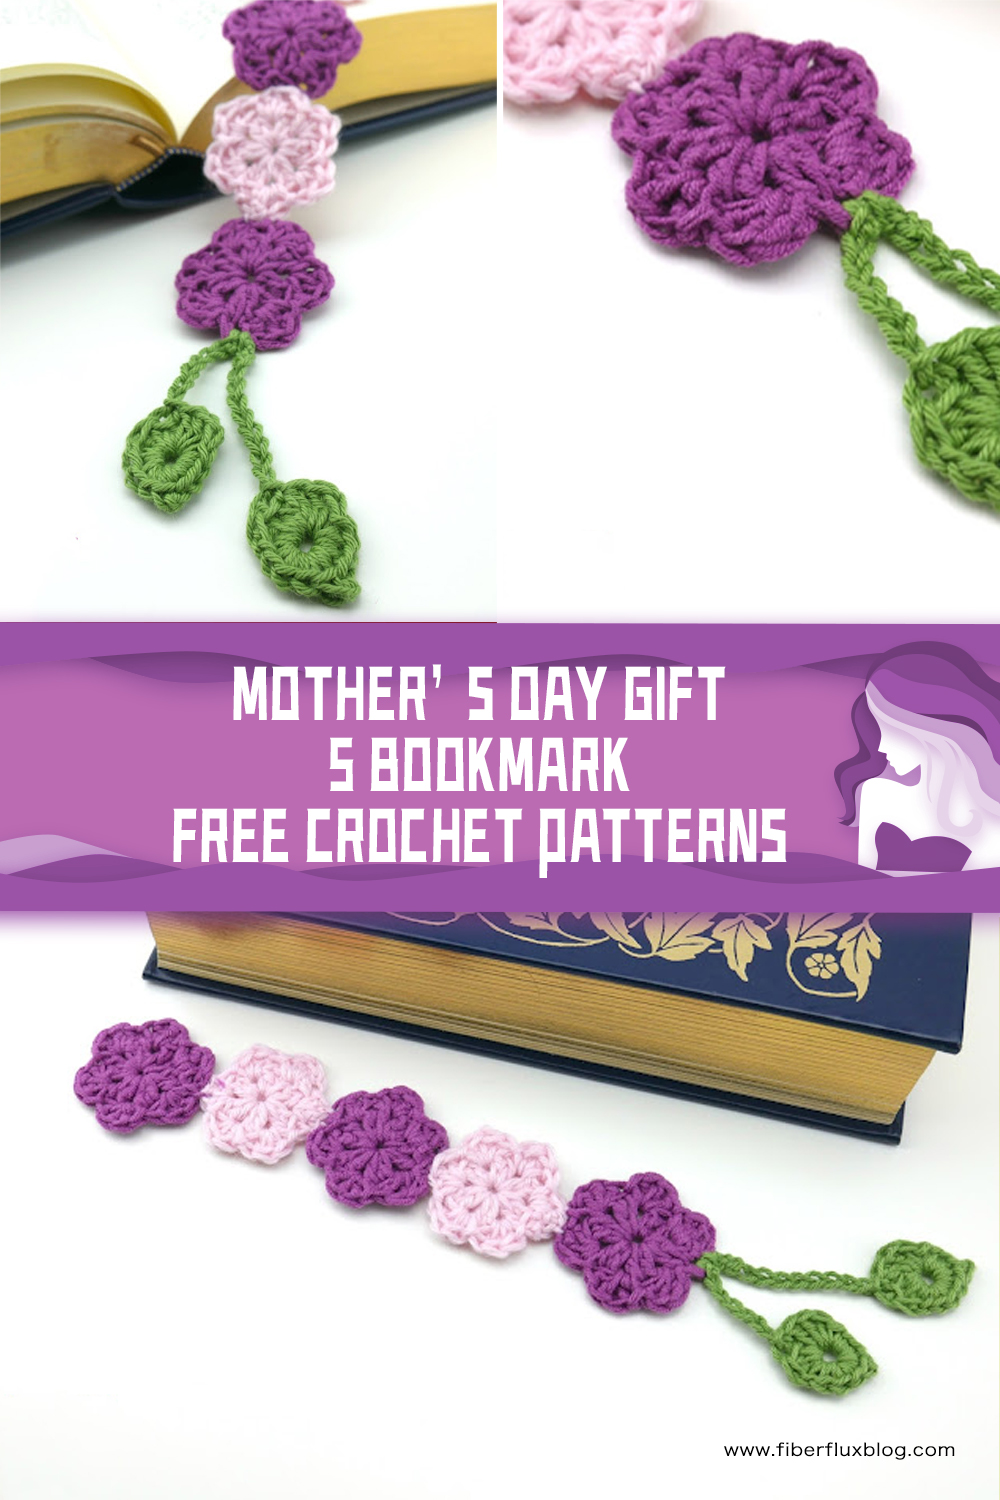 Mother’s Day Gift - 5 Bookmark FREE Crochet Patterns 